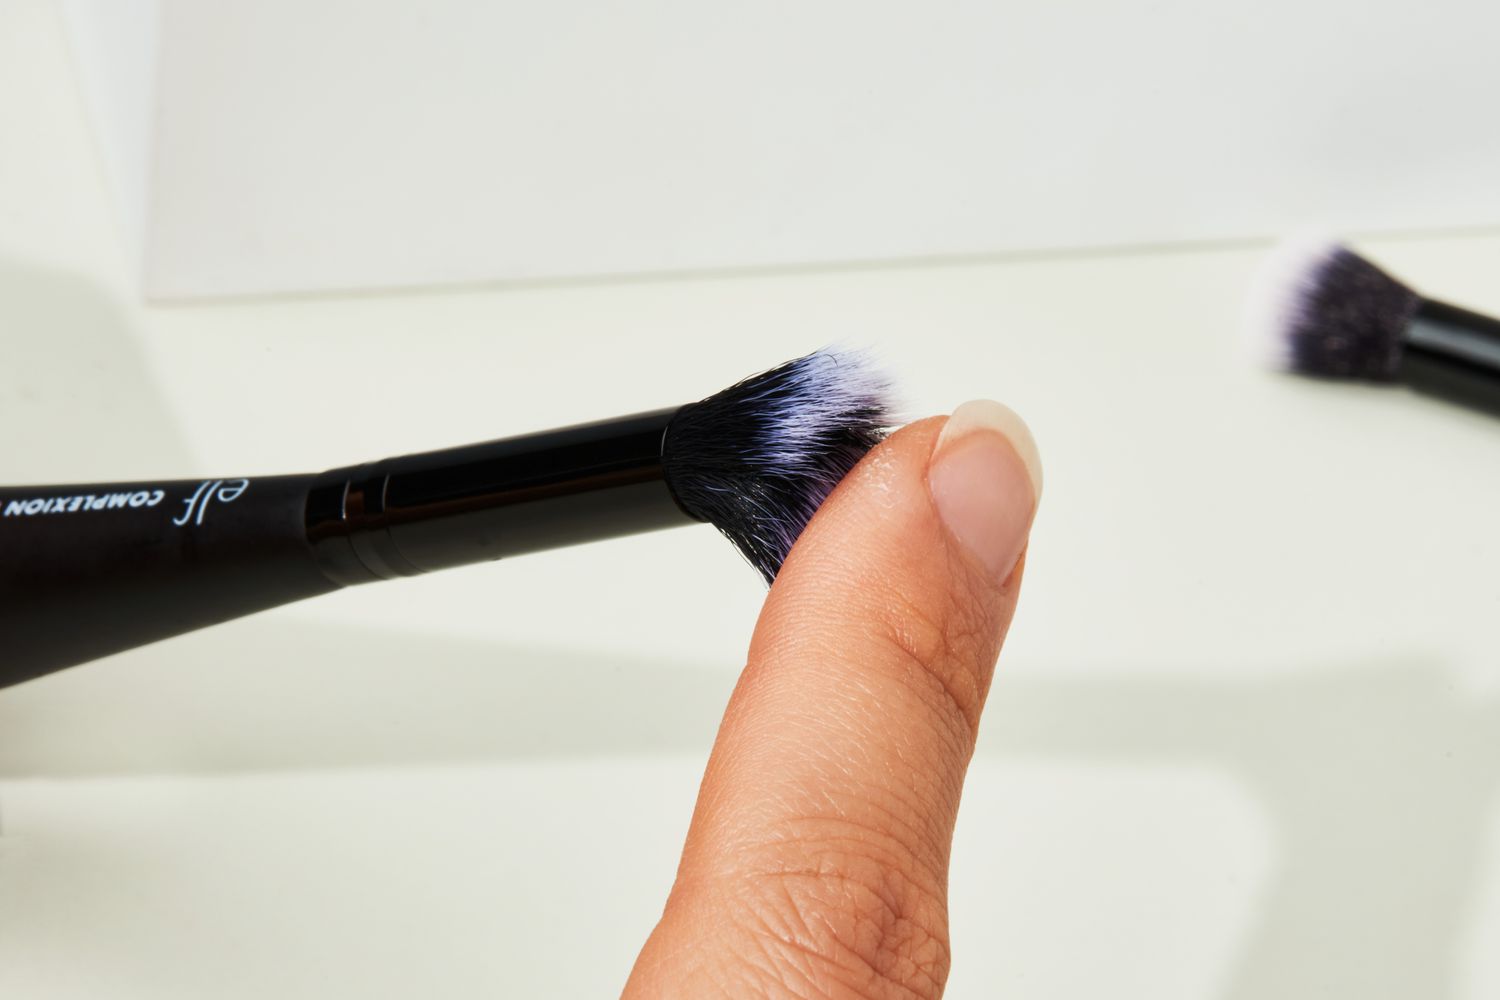 Review: Best Makeup Brushes Set for Flawless Application